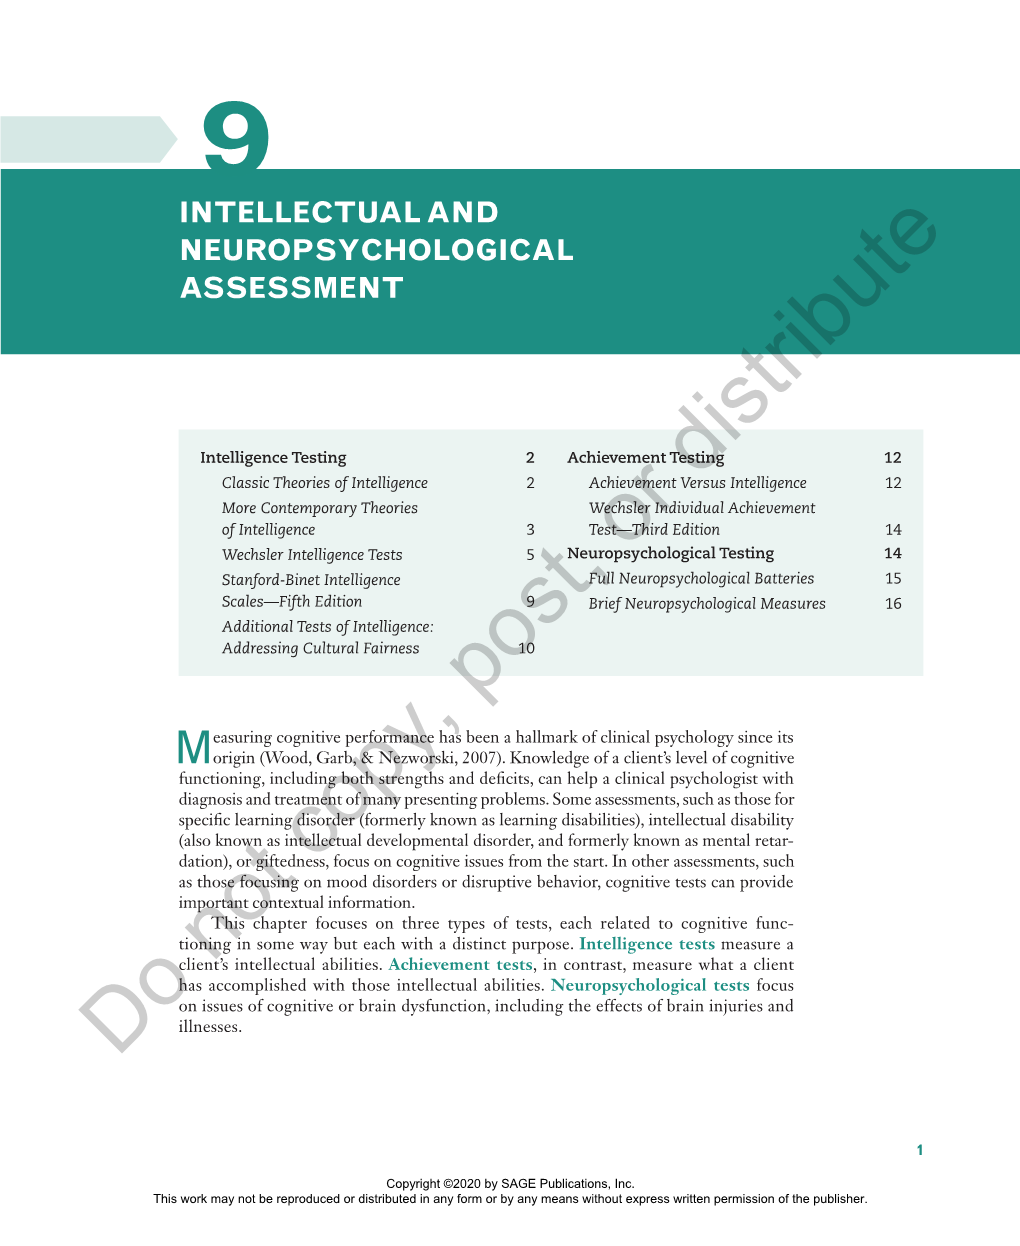 Chapter 9. Intellectual and Neuropsychological Assessment